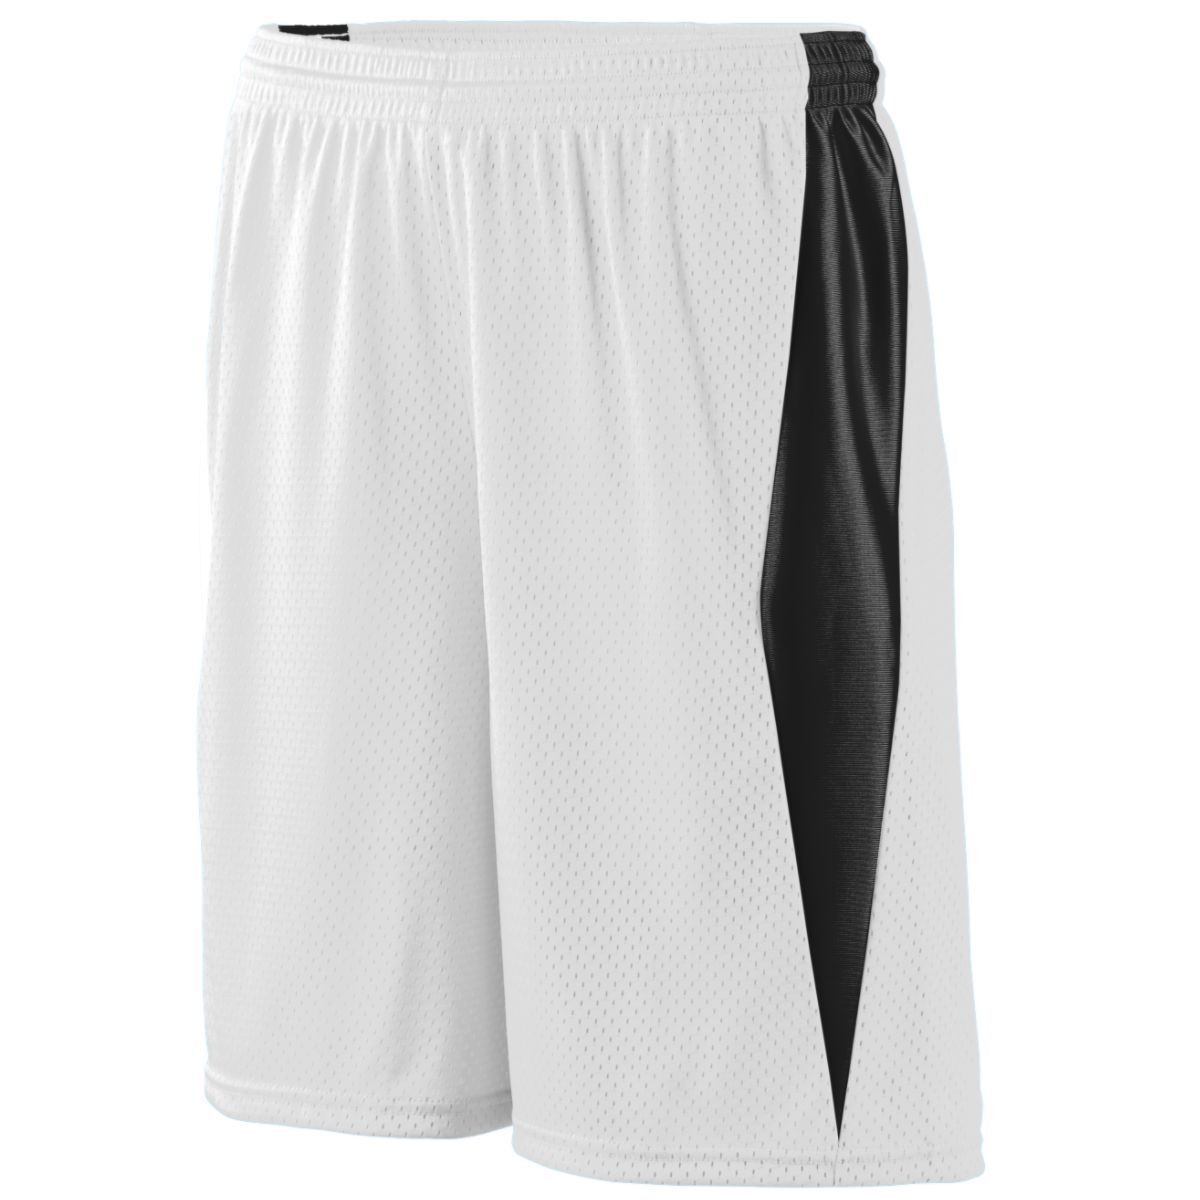 Augusta Sportswear Top Score Shorts in White/Black  -Part of the Adult, Adult-Shorts, Augusta-Products, Lacrosse, All-Sports, All-Sports-1 product lines at KanaleyCreations.com